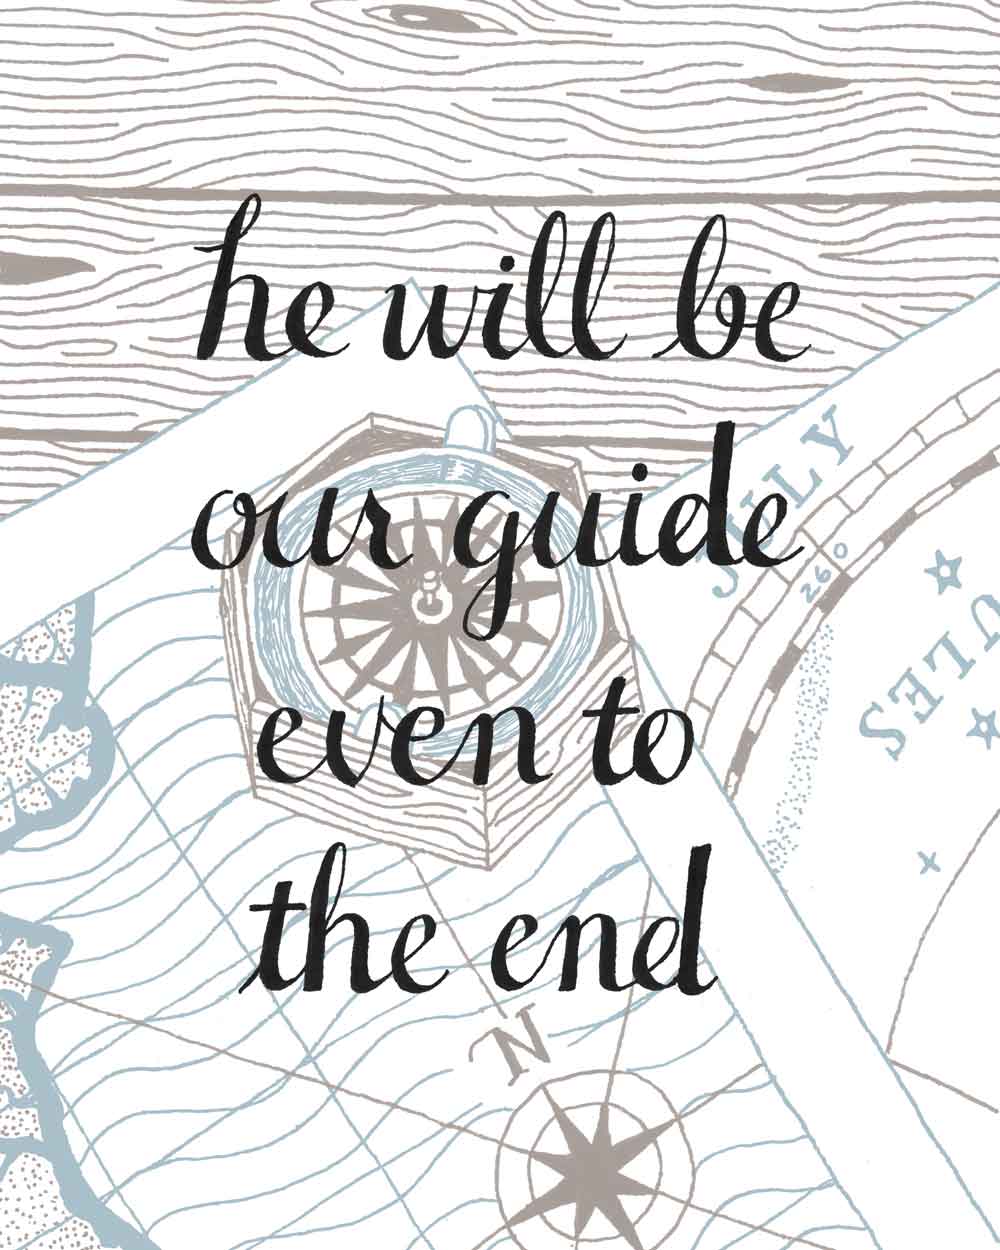 Psalm 48. Hand Lettering overlaid over illustration of compass and map. Text reads: He will be our guide even to the end.